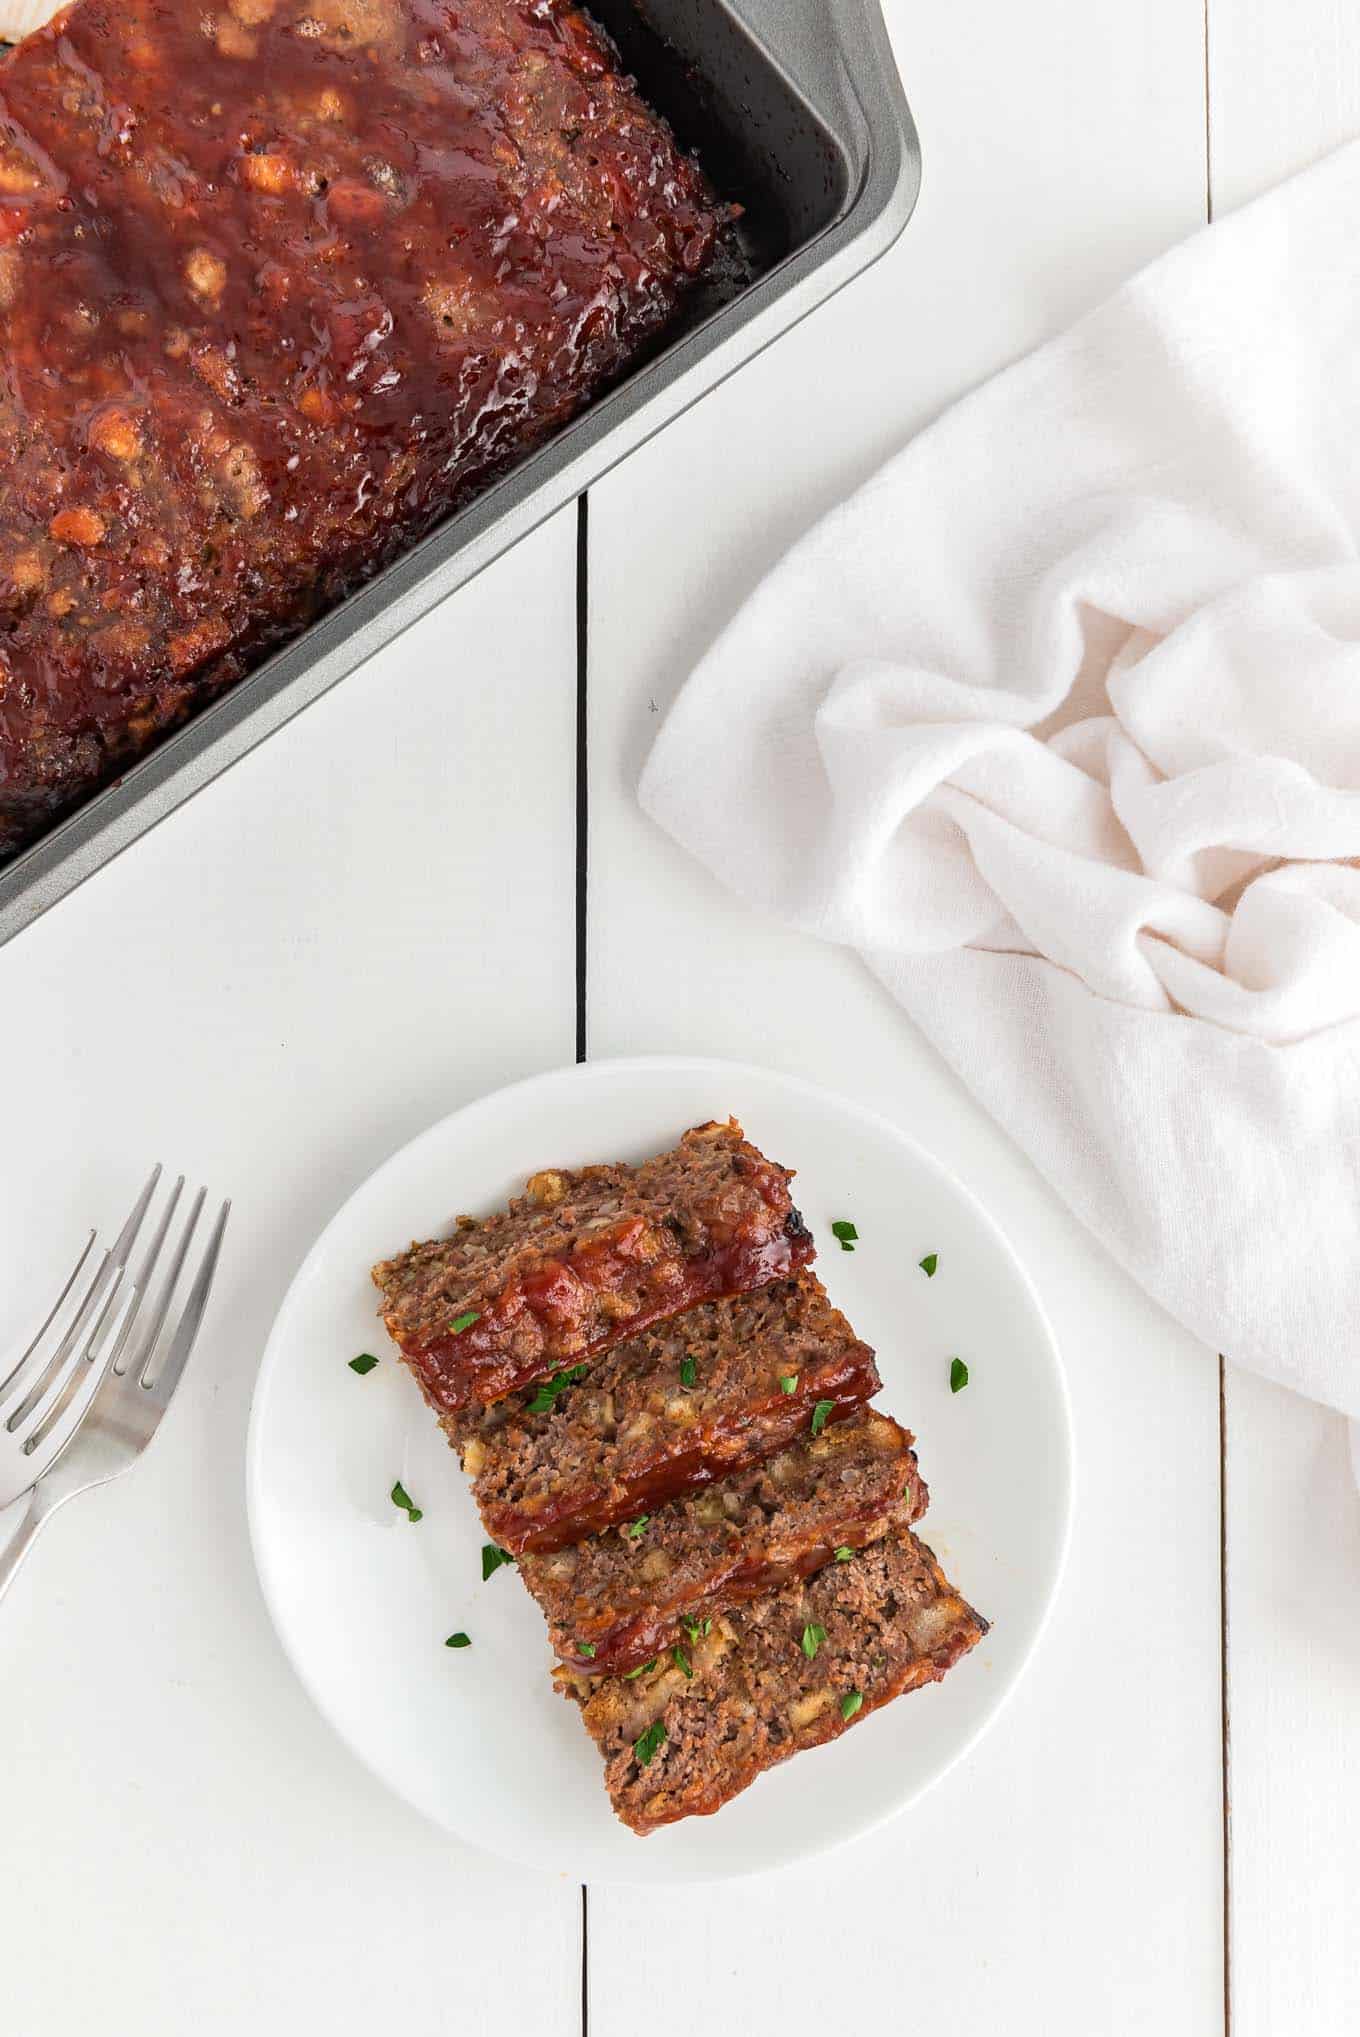 Plate and pan of meatloaf.